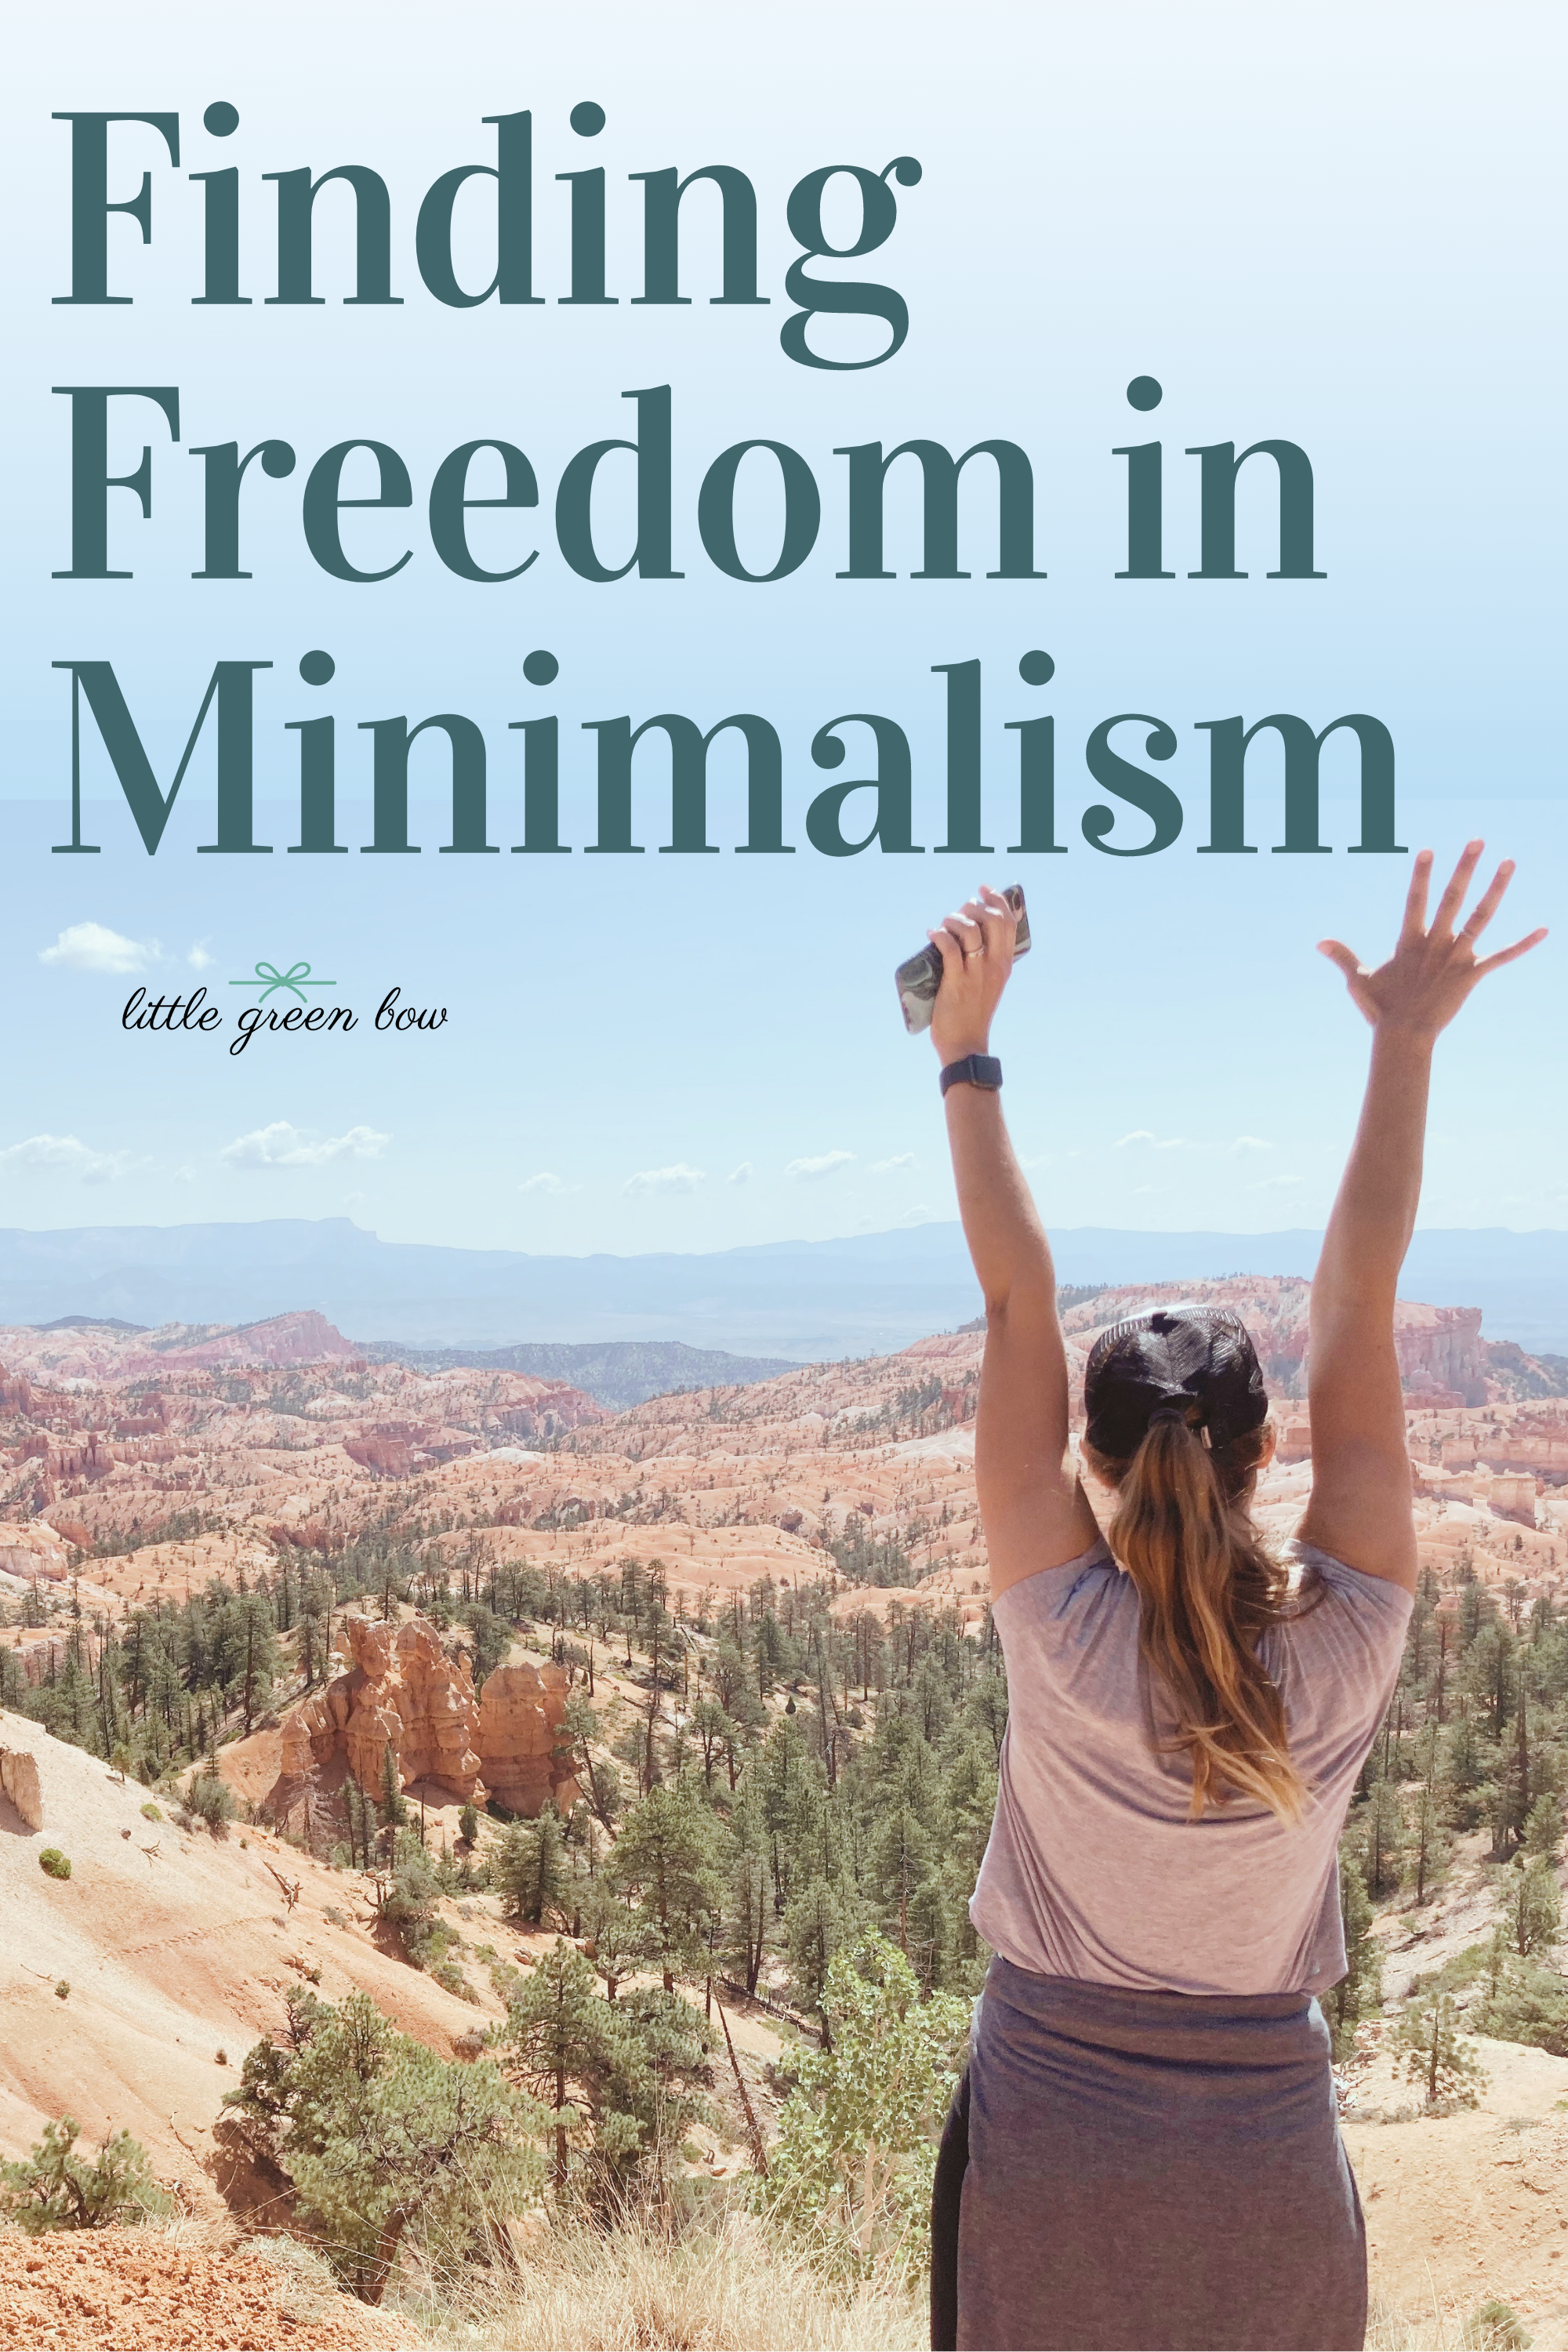 Finding Freedom in Minimalism